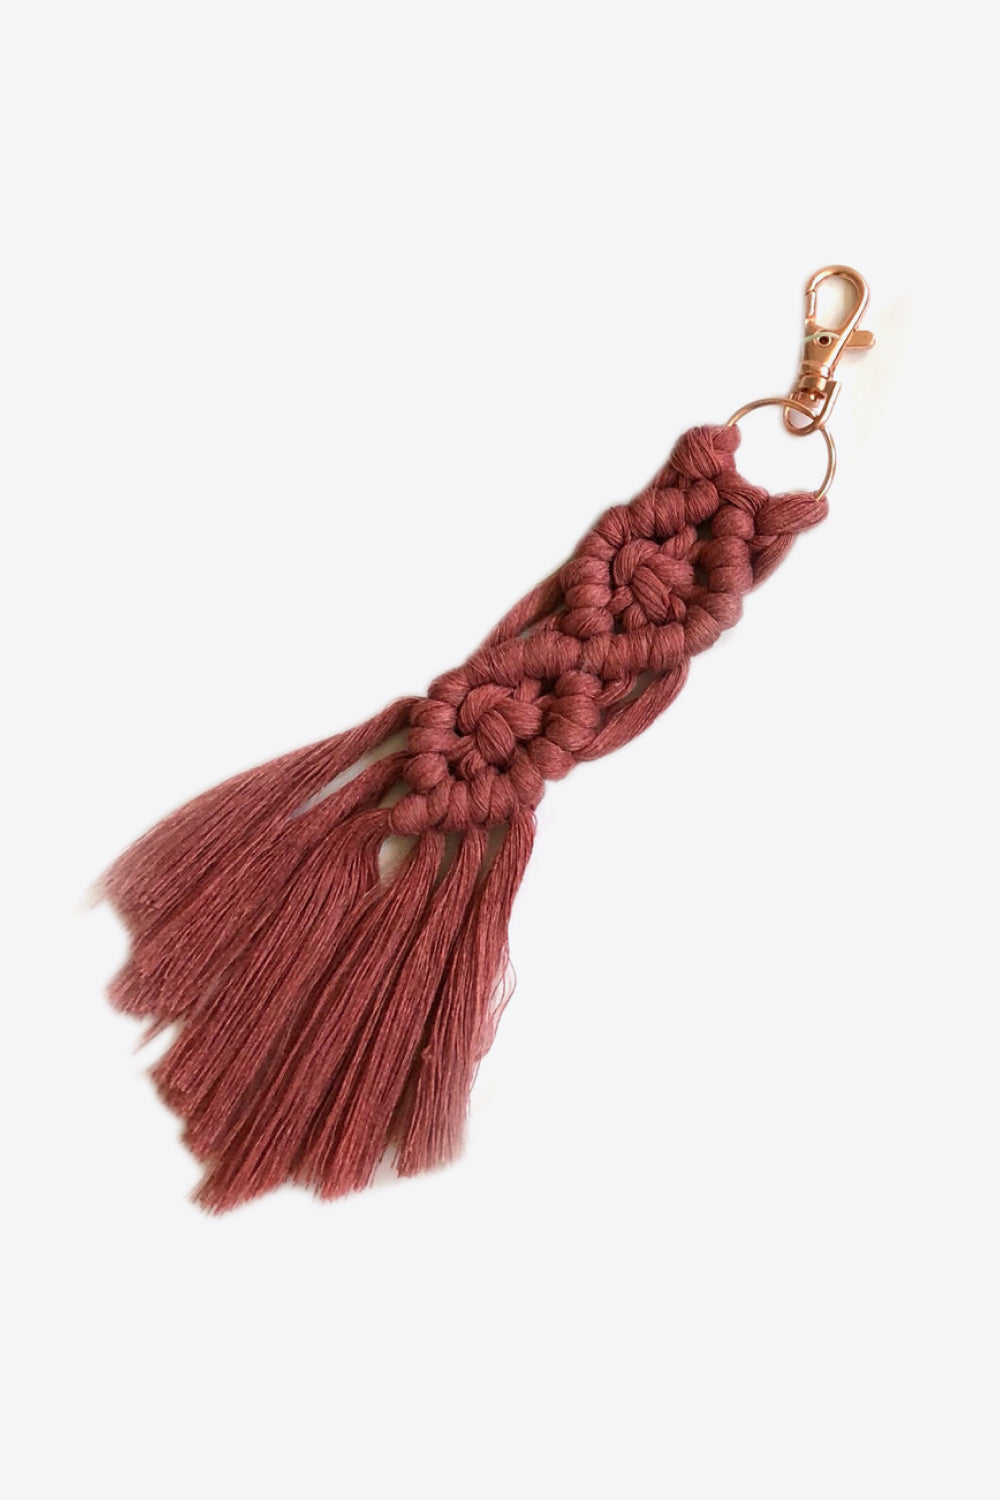 Trendsi Cupid Beauty Supplies Wine / One Size Keychains Assorted 4-Pack Macrame Fringe Keychain